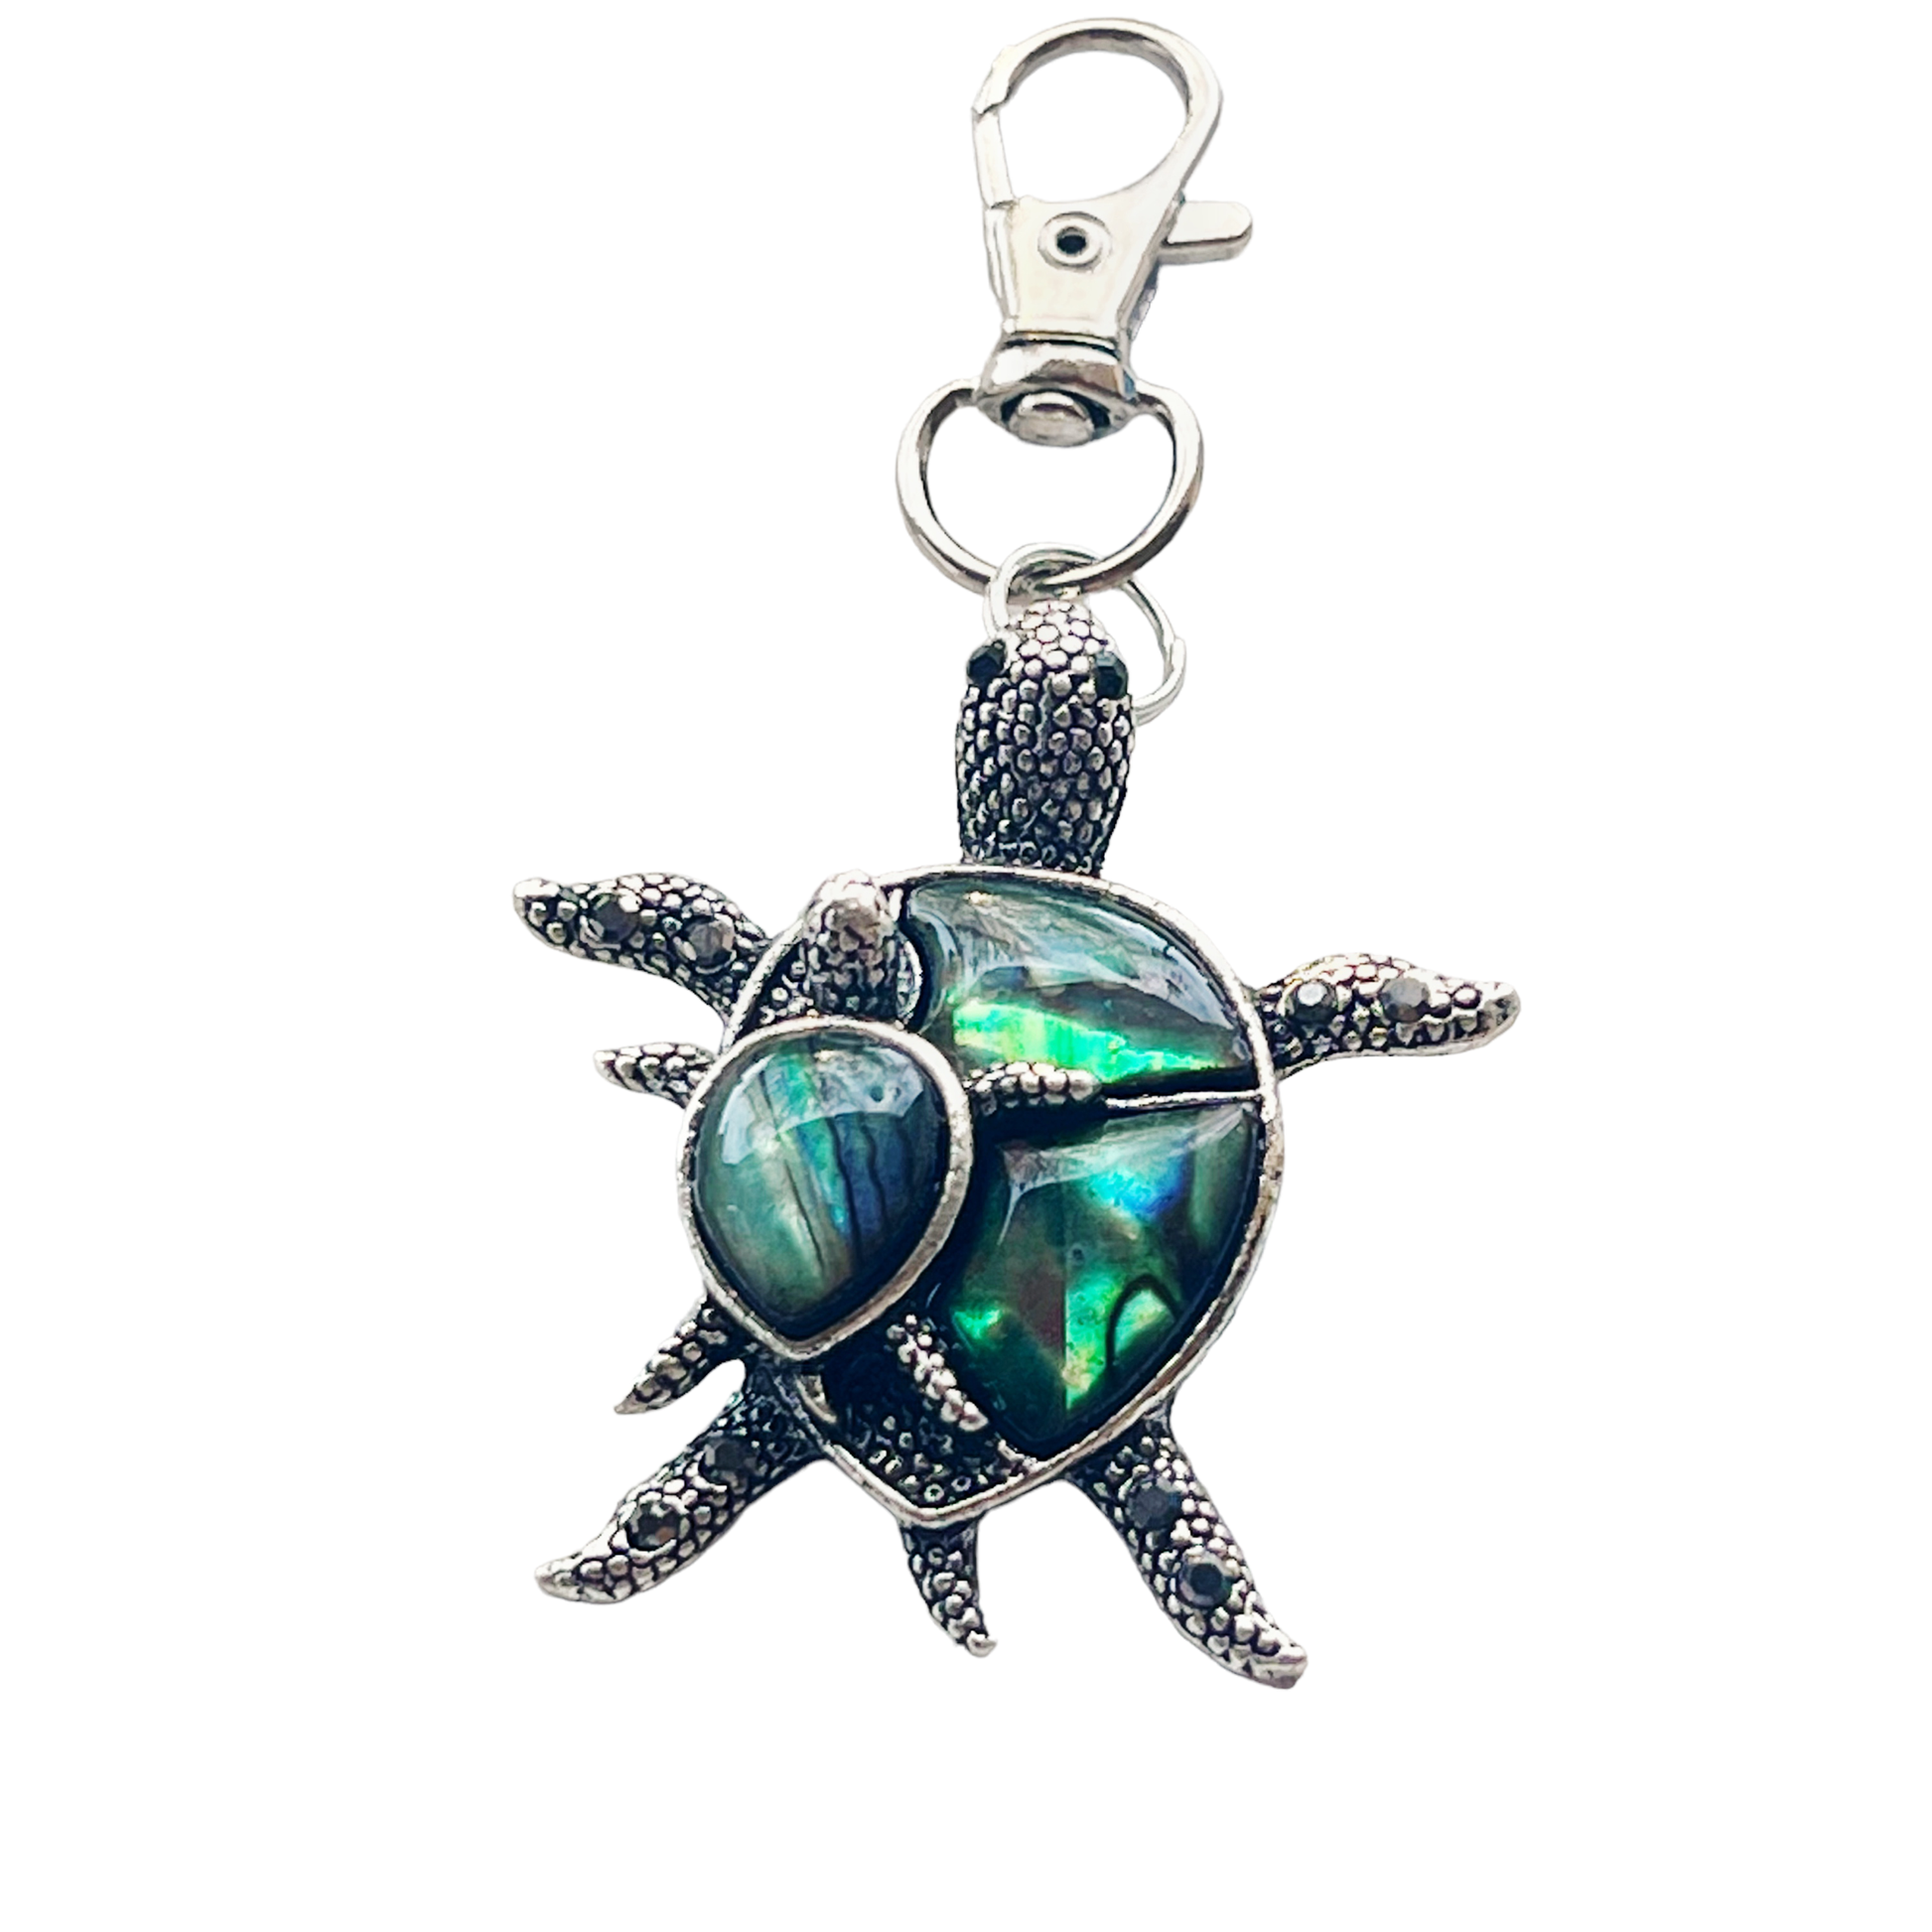 Turtle with Baby Purse Charm with Natural Abalone - Adorable Coastal-Inspired Accessory